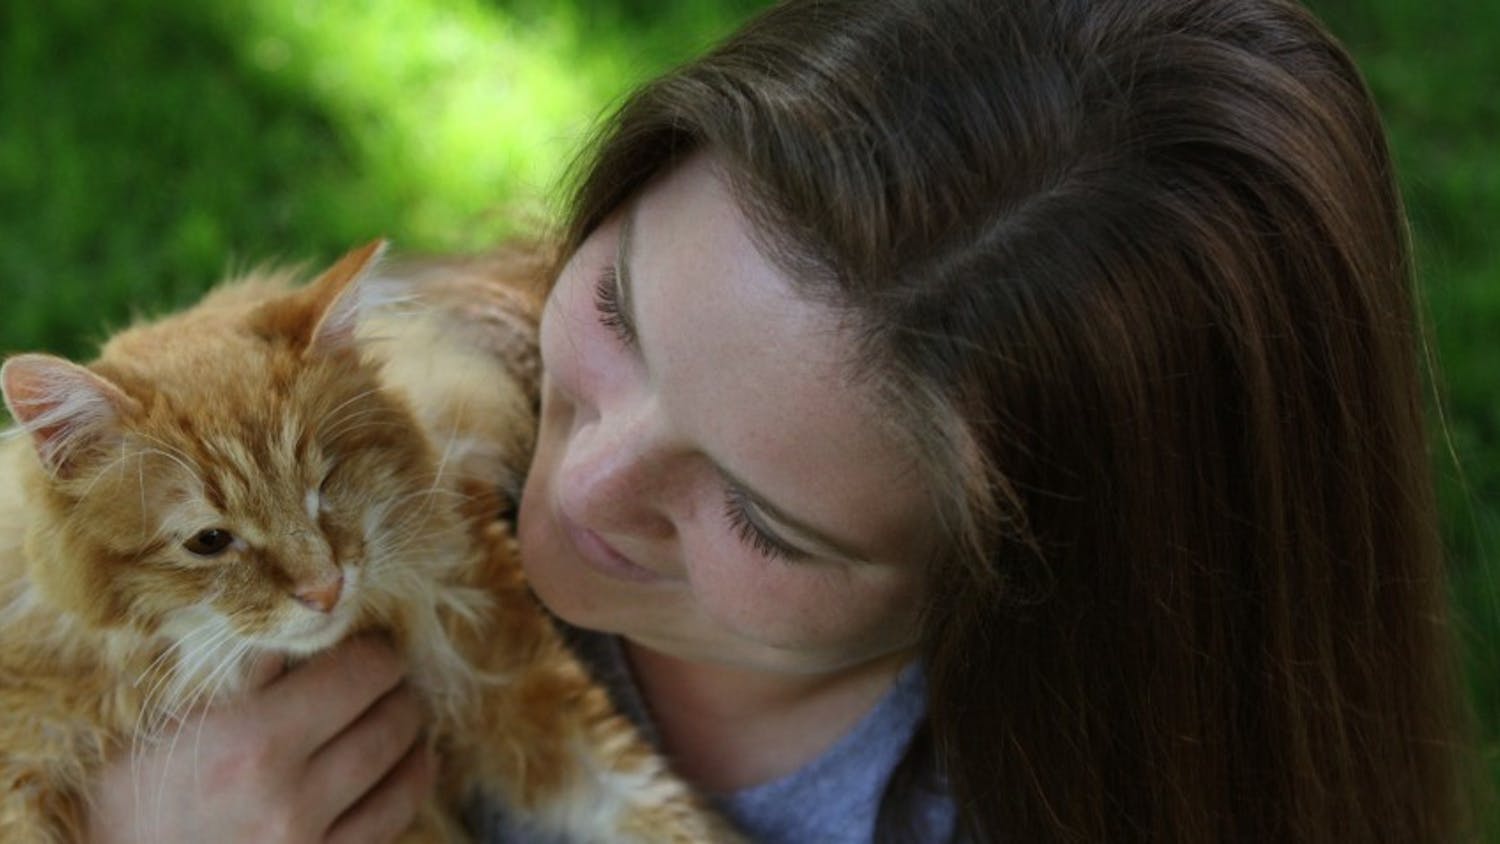 Photo: UNC graduate will travel to Japan to help animals affected by quake (Erin Hull)